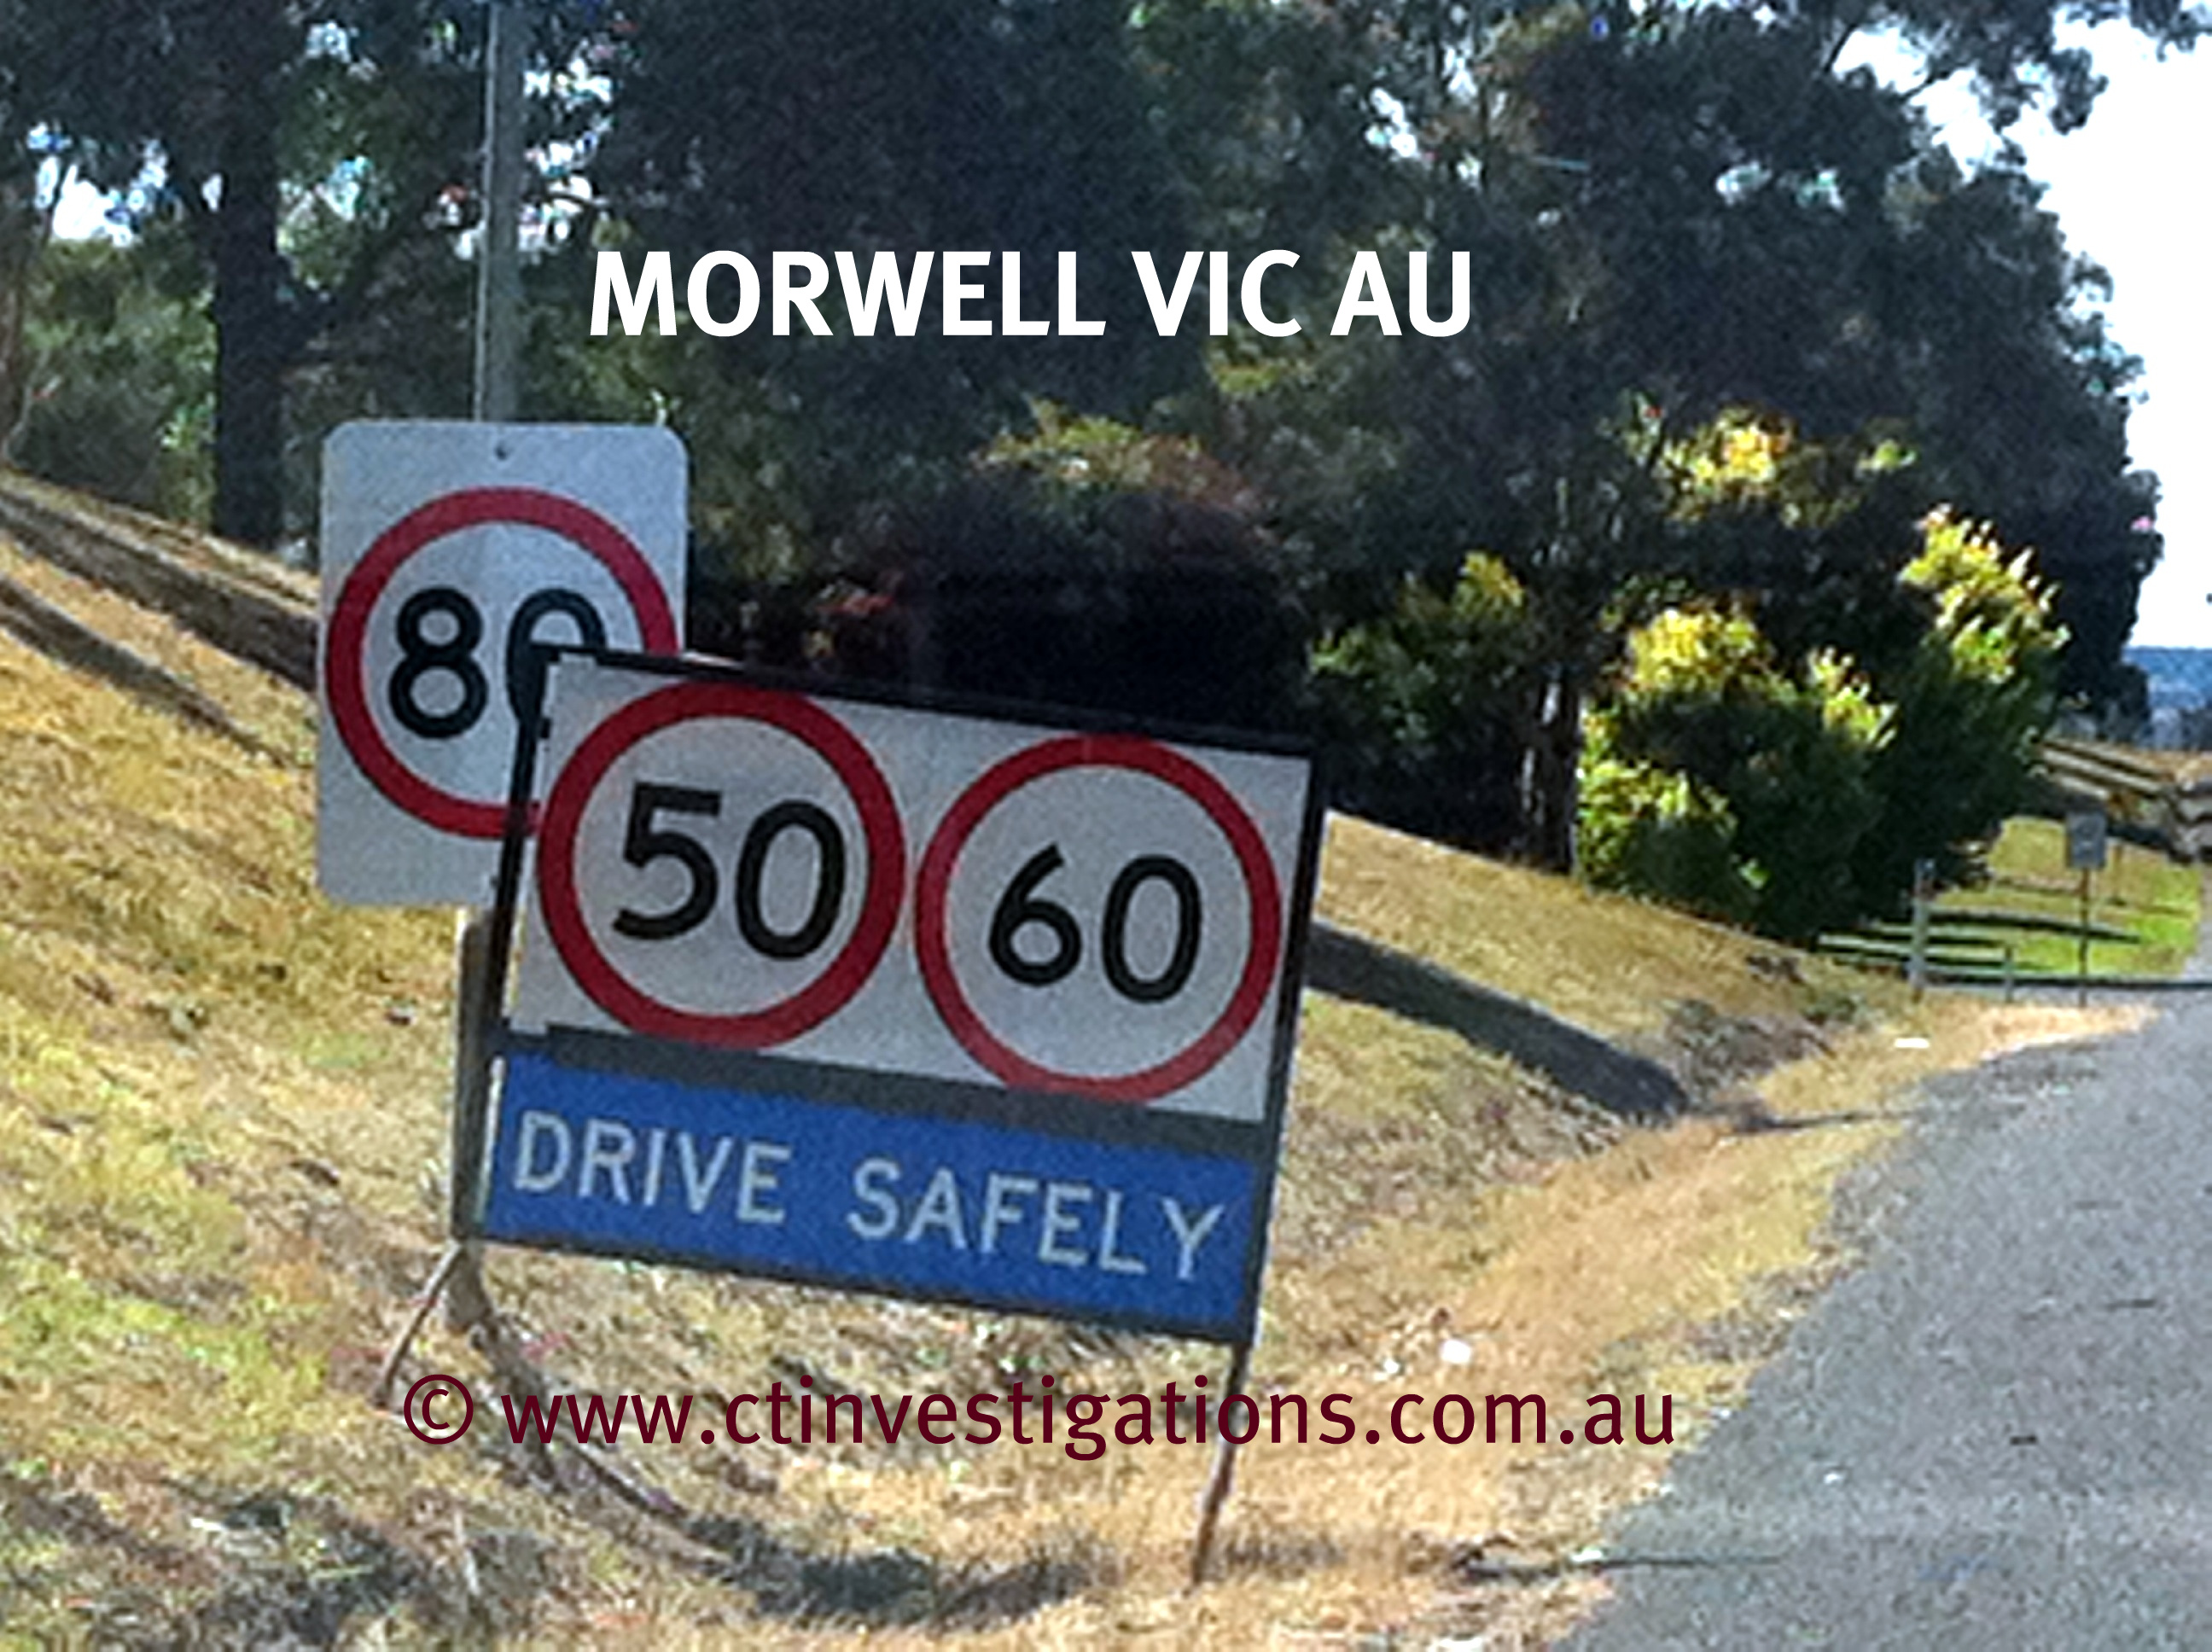 This temporary speed sign in Morwell Vic Australia